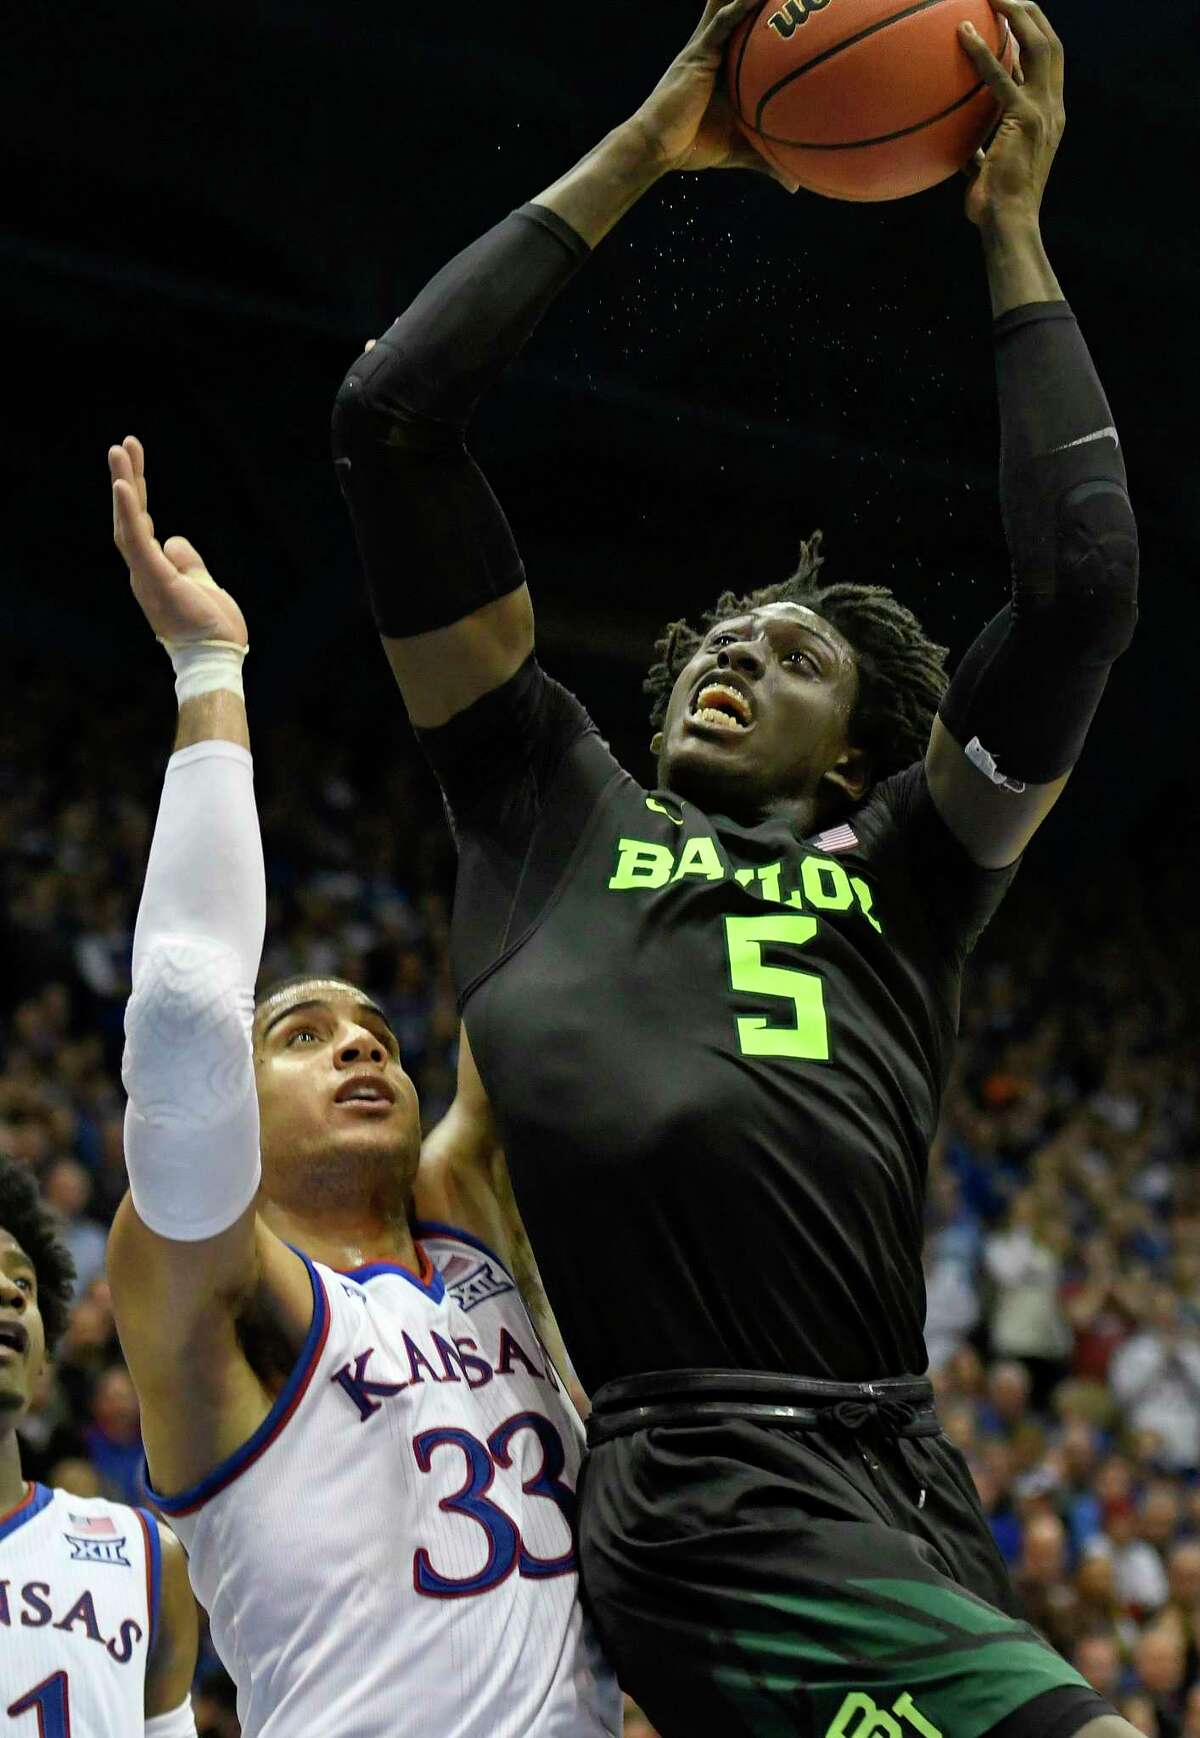 Baylor Bears forward Johnathan Motley (5) goes up for a shot against Kansas Jayhawks forward Landen Lucas (33) during the second half of an NCAA college basketball game in Lawrence, Kan., Wednesday, Feb. 1, 2017. (AP Photo/Reed Hoffmann)